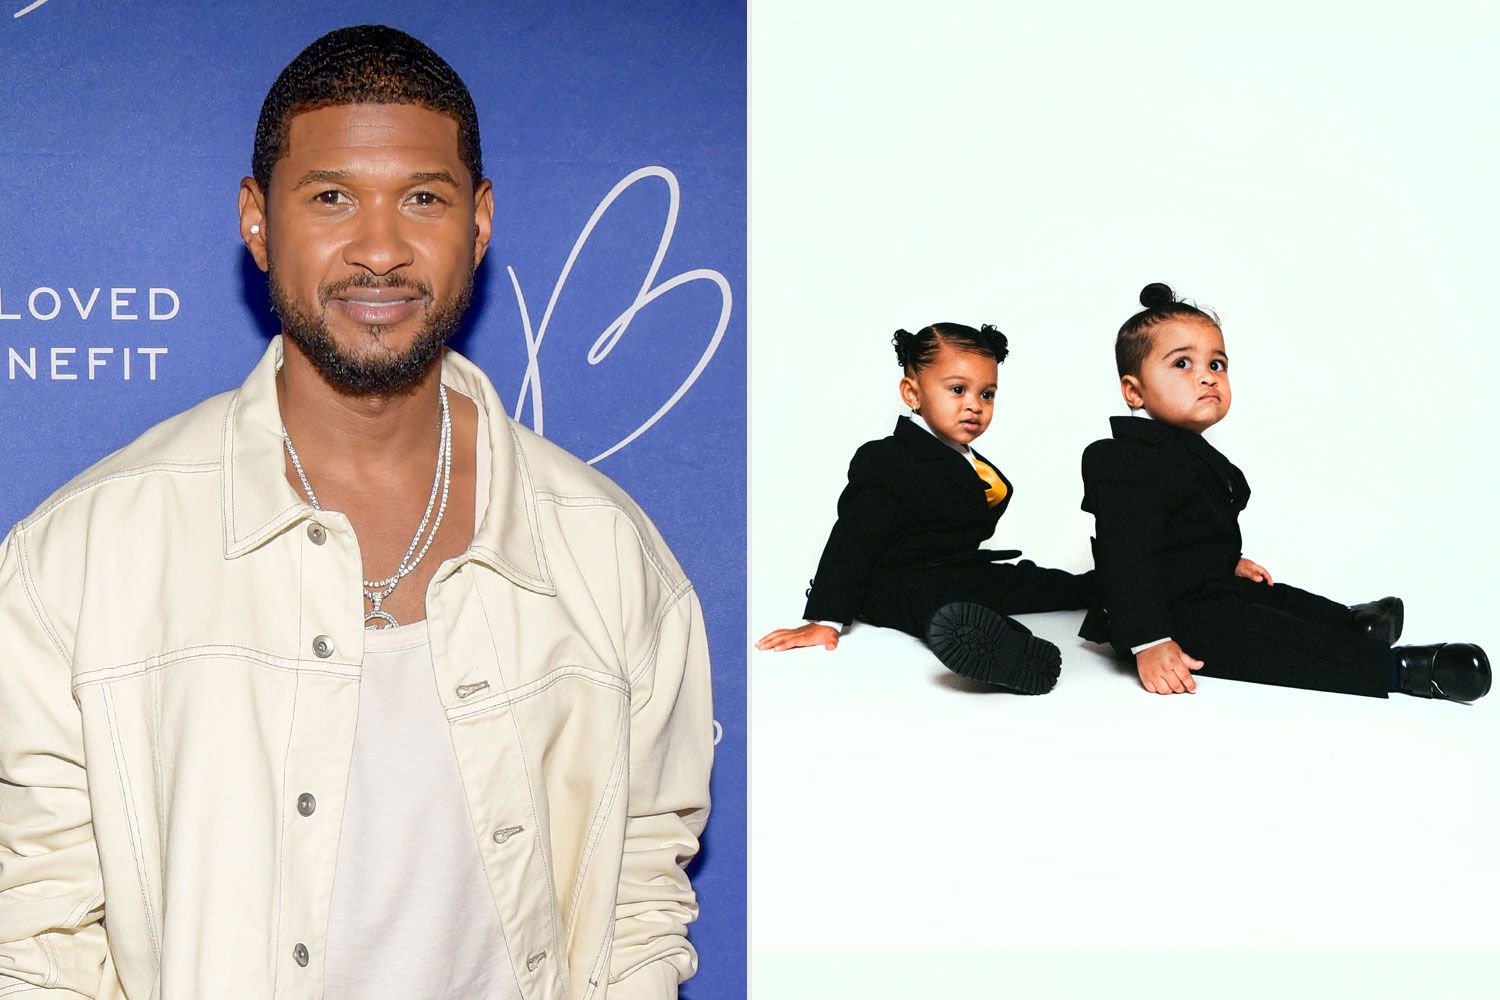 ATLANTA, GEORGIA - JULY 07: Usher attends the 2022 Beloved Benefit at Mercedes-Benz Stadium on July 07, 2022 in Atlanta, Georgia. (Photo by Marcus Ingram/Getty Images); Usher Shares Photos of 'Lil Bosses' Sovereign and Sire in Suits Celebrating Their Birthdays. photo credit Bellamy Brewster